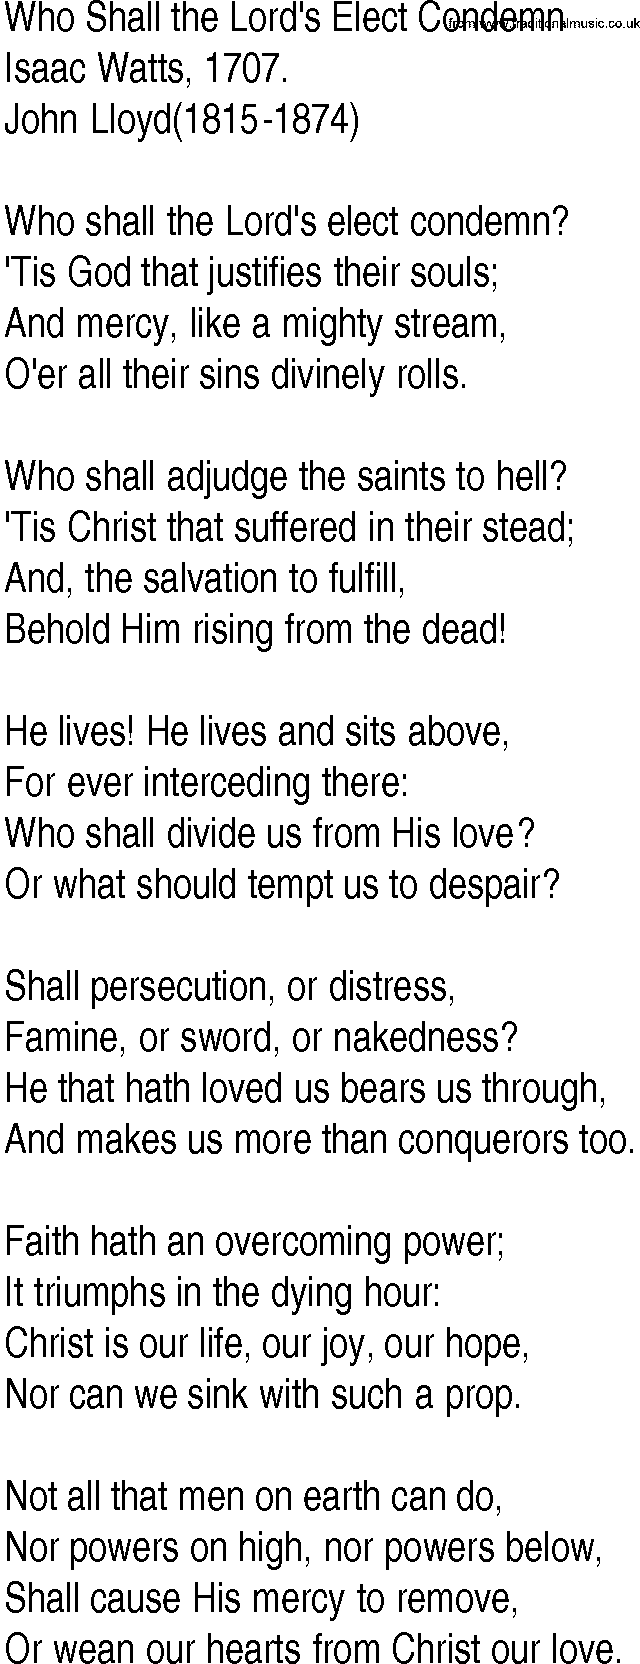 Hymn and Gospel Song: Who Shall the Lord's Elect Condemn by Isaac Watts lyrics